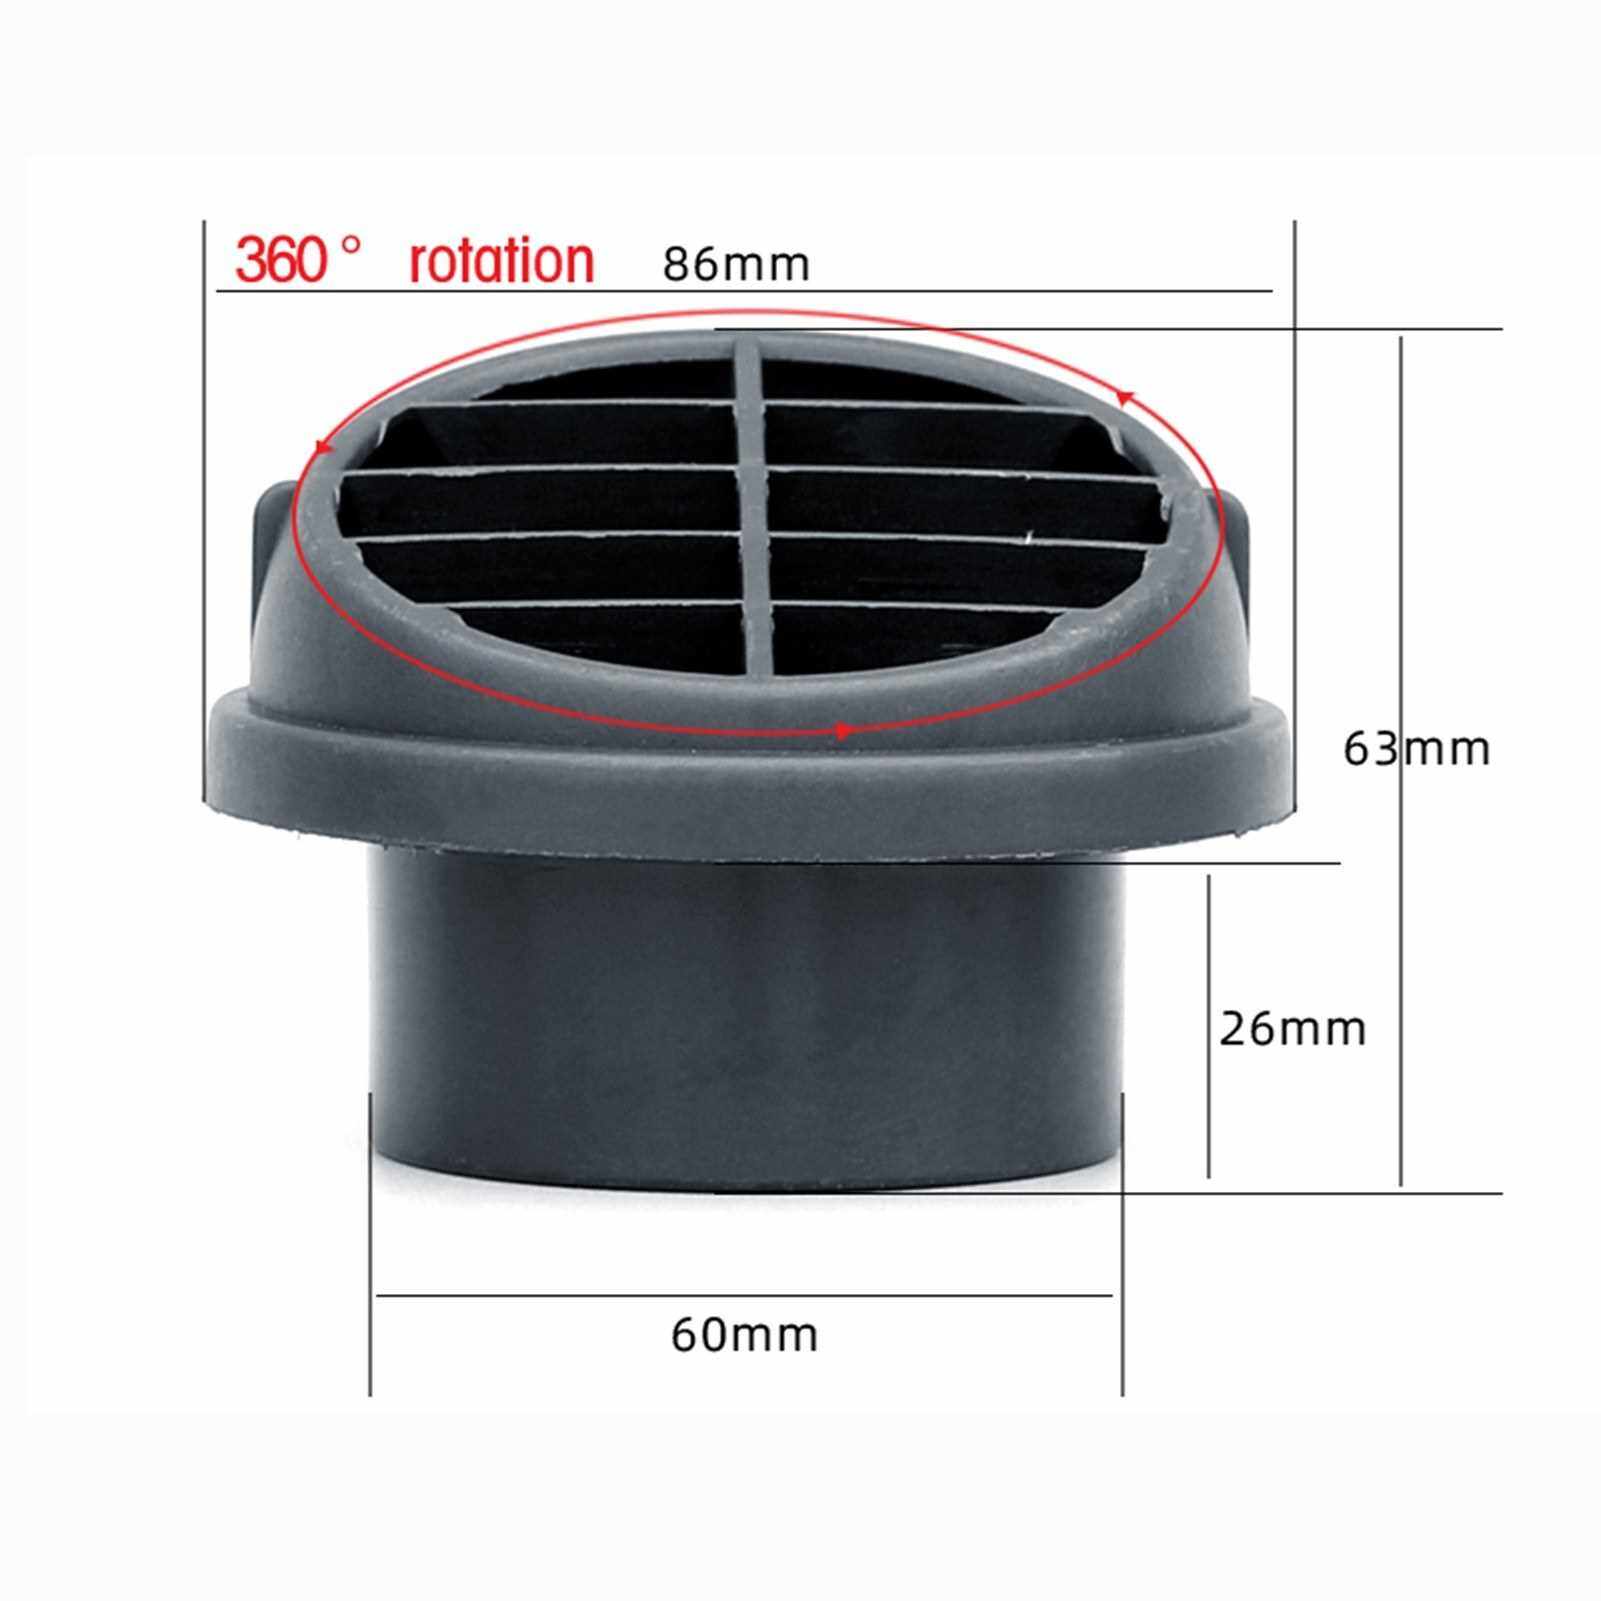 Air Vent Ducting T Y Tilted Bend Style Piece Elbow Pipe Outlet Exhaust Connector for Webasto Eberspaecher Diesel Parking Heater Truck Boat Car Air Diesel Heater Accessory (R1)